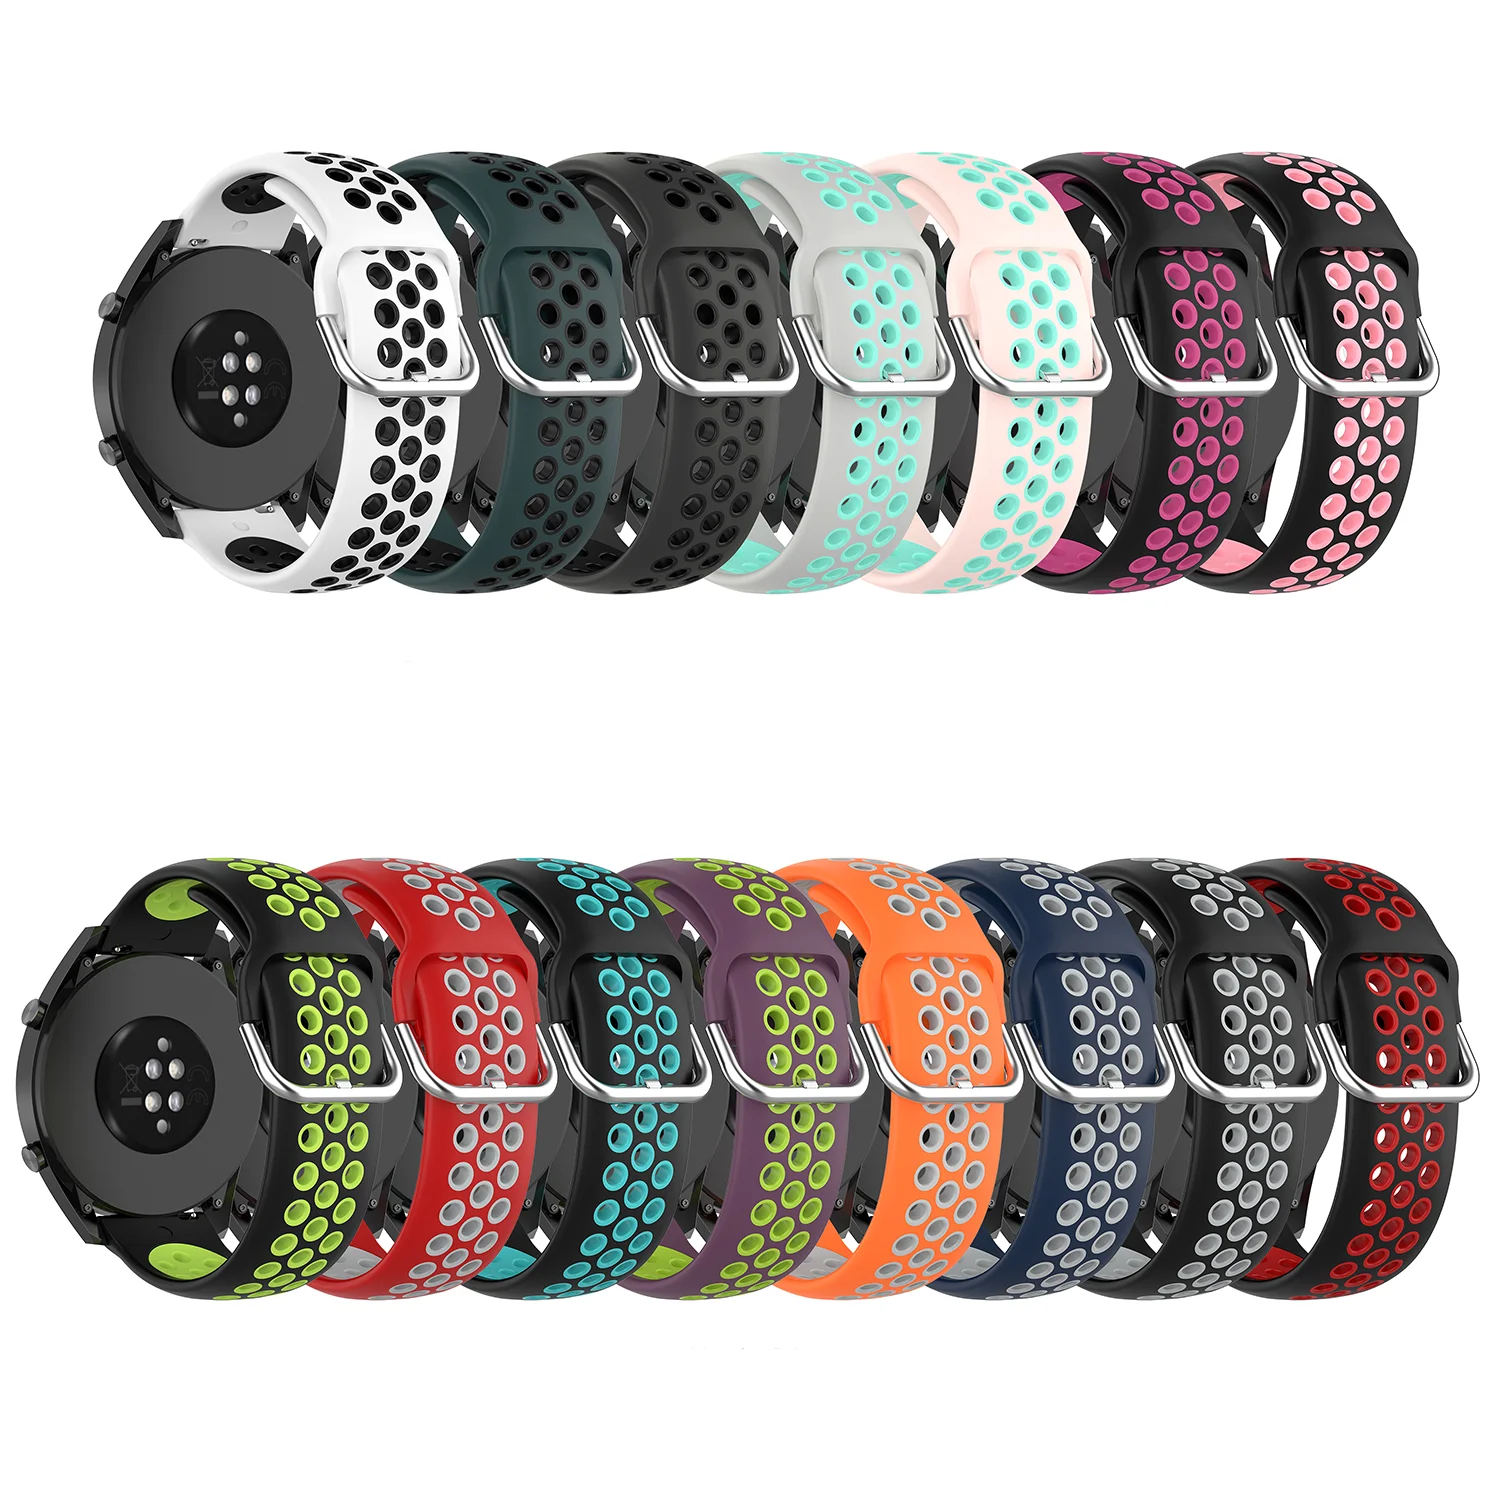 

Soft Silicone Wrist Strap For Huawei GT/GT2 42/46mm 20mm 22mm Wristband For Fitbit Versa Lite 23mm Sport Rubber Watch Bracelet